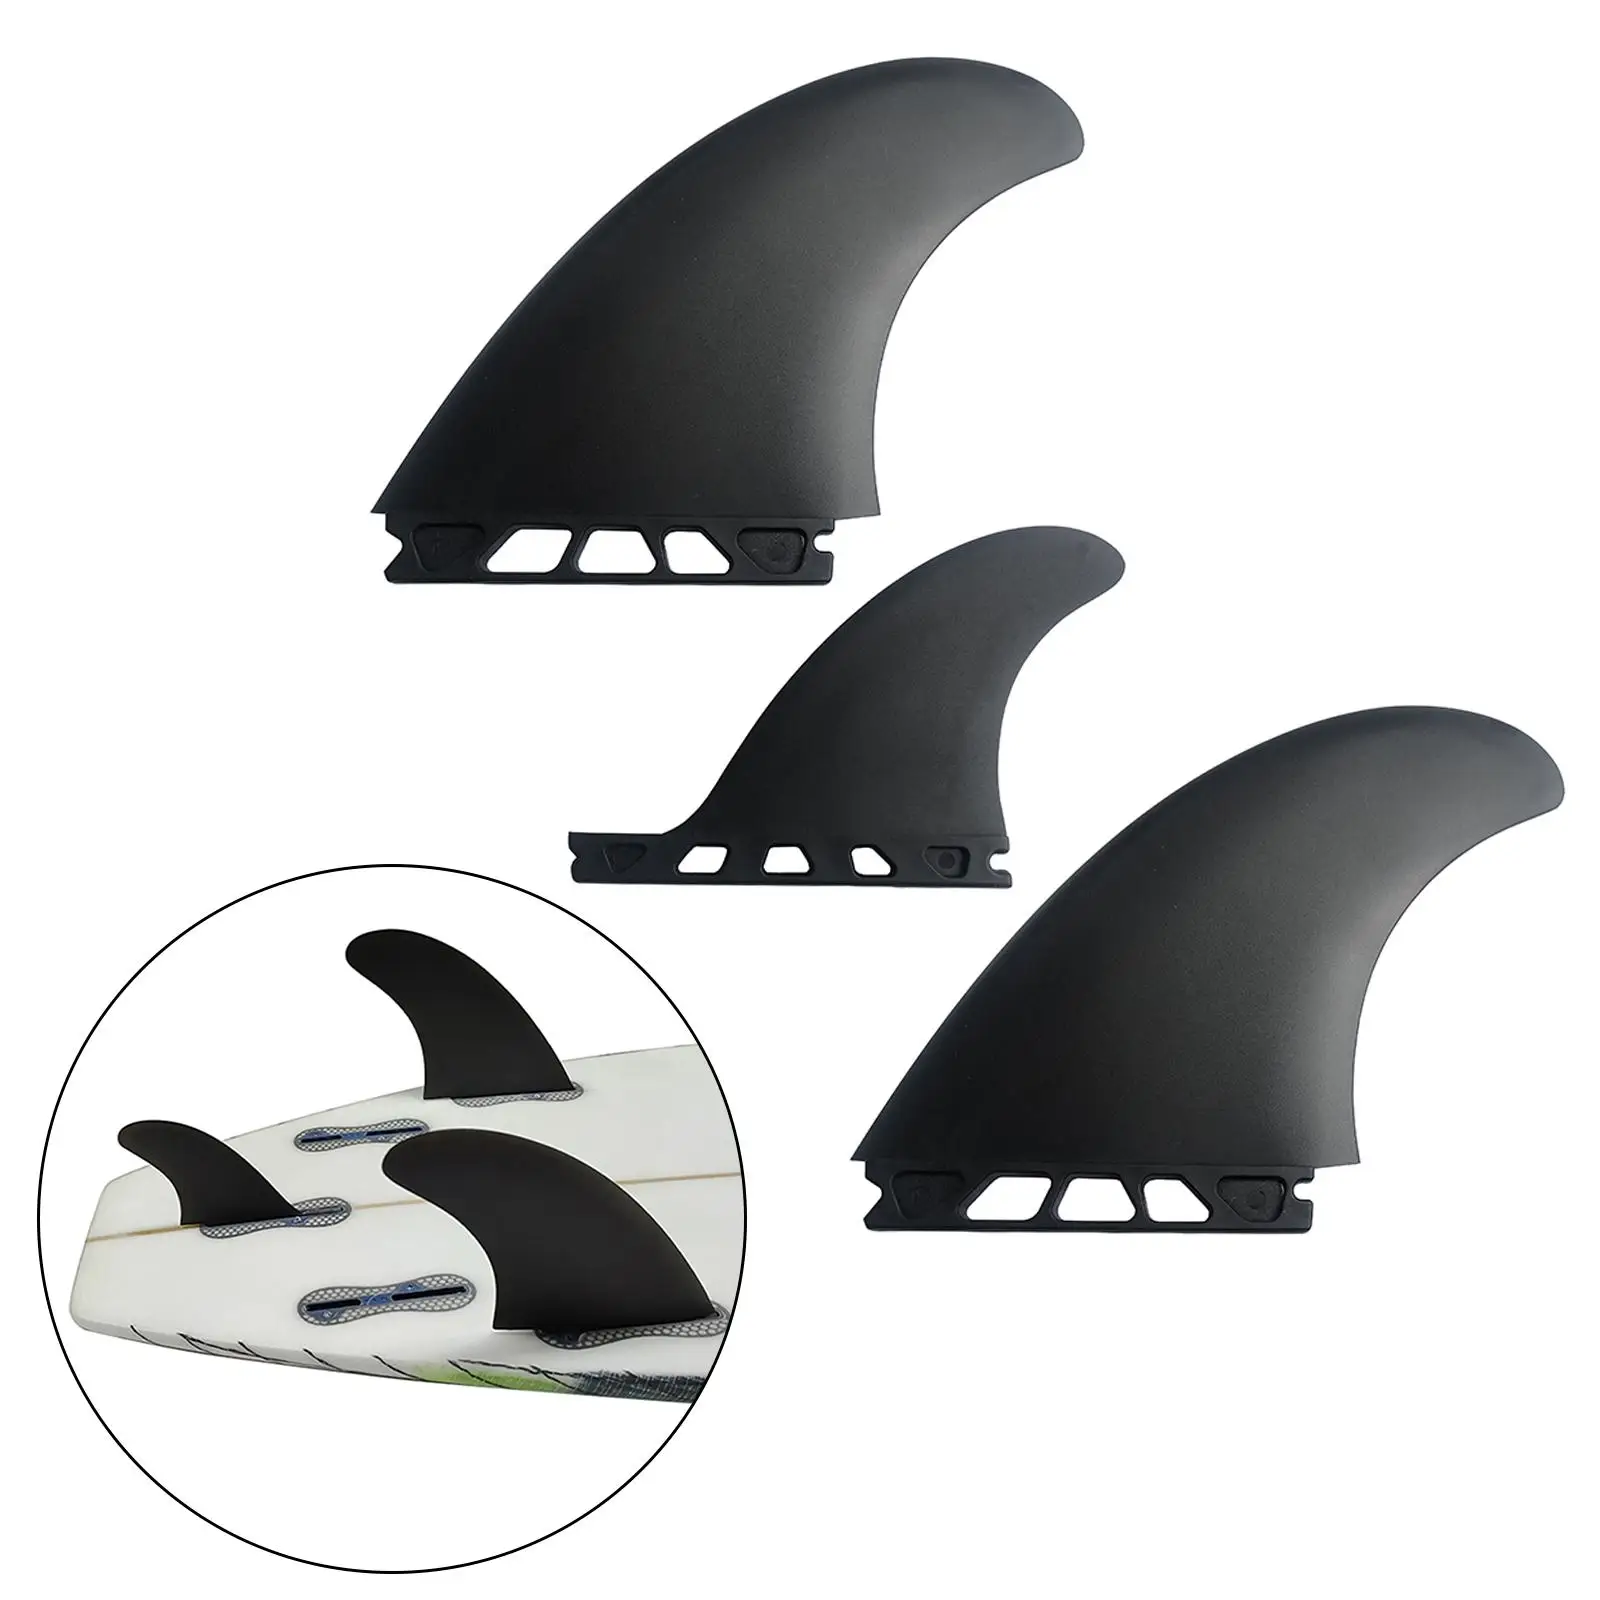 3x Surfing Fin Detachable Quick Release Surfboard Fins Accessory